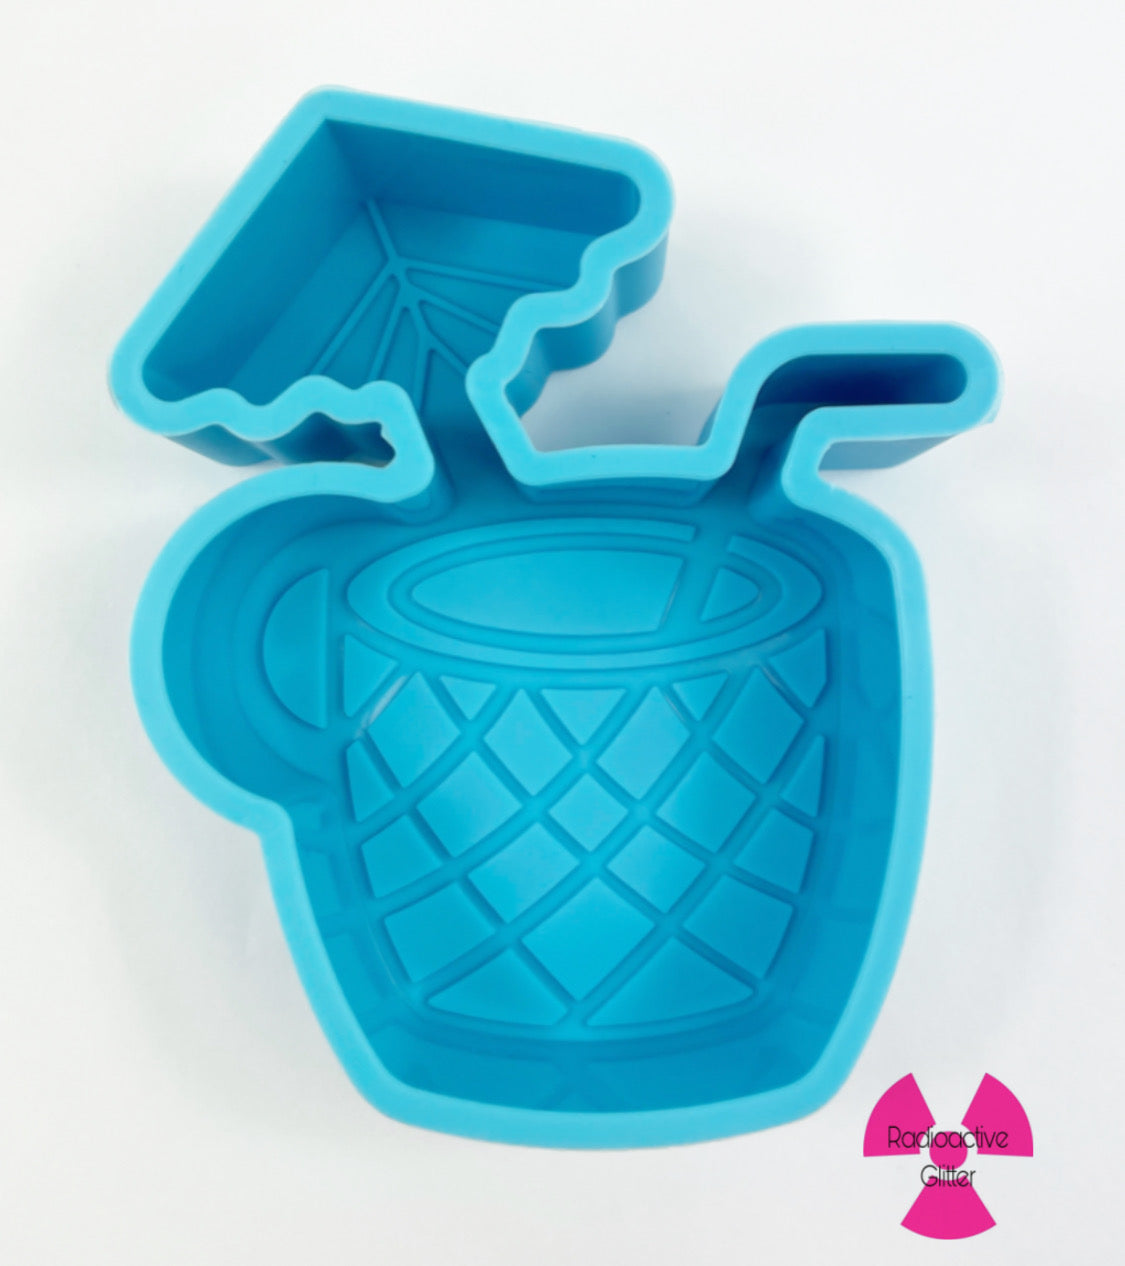 F063 Freshie Silicone Mold Cup